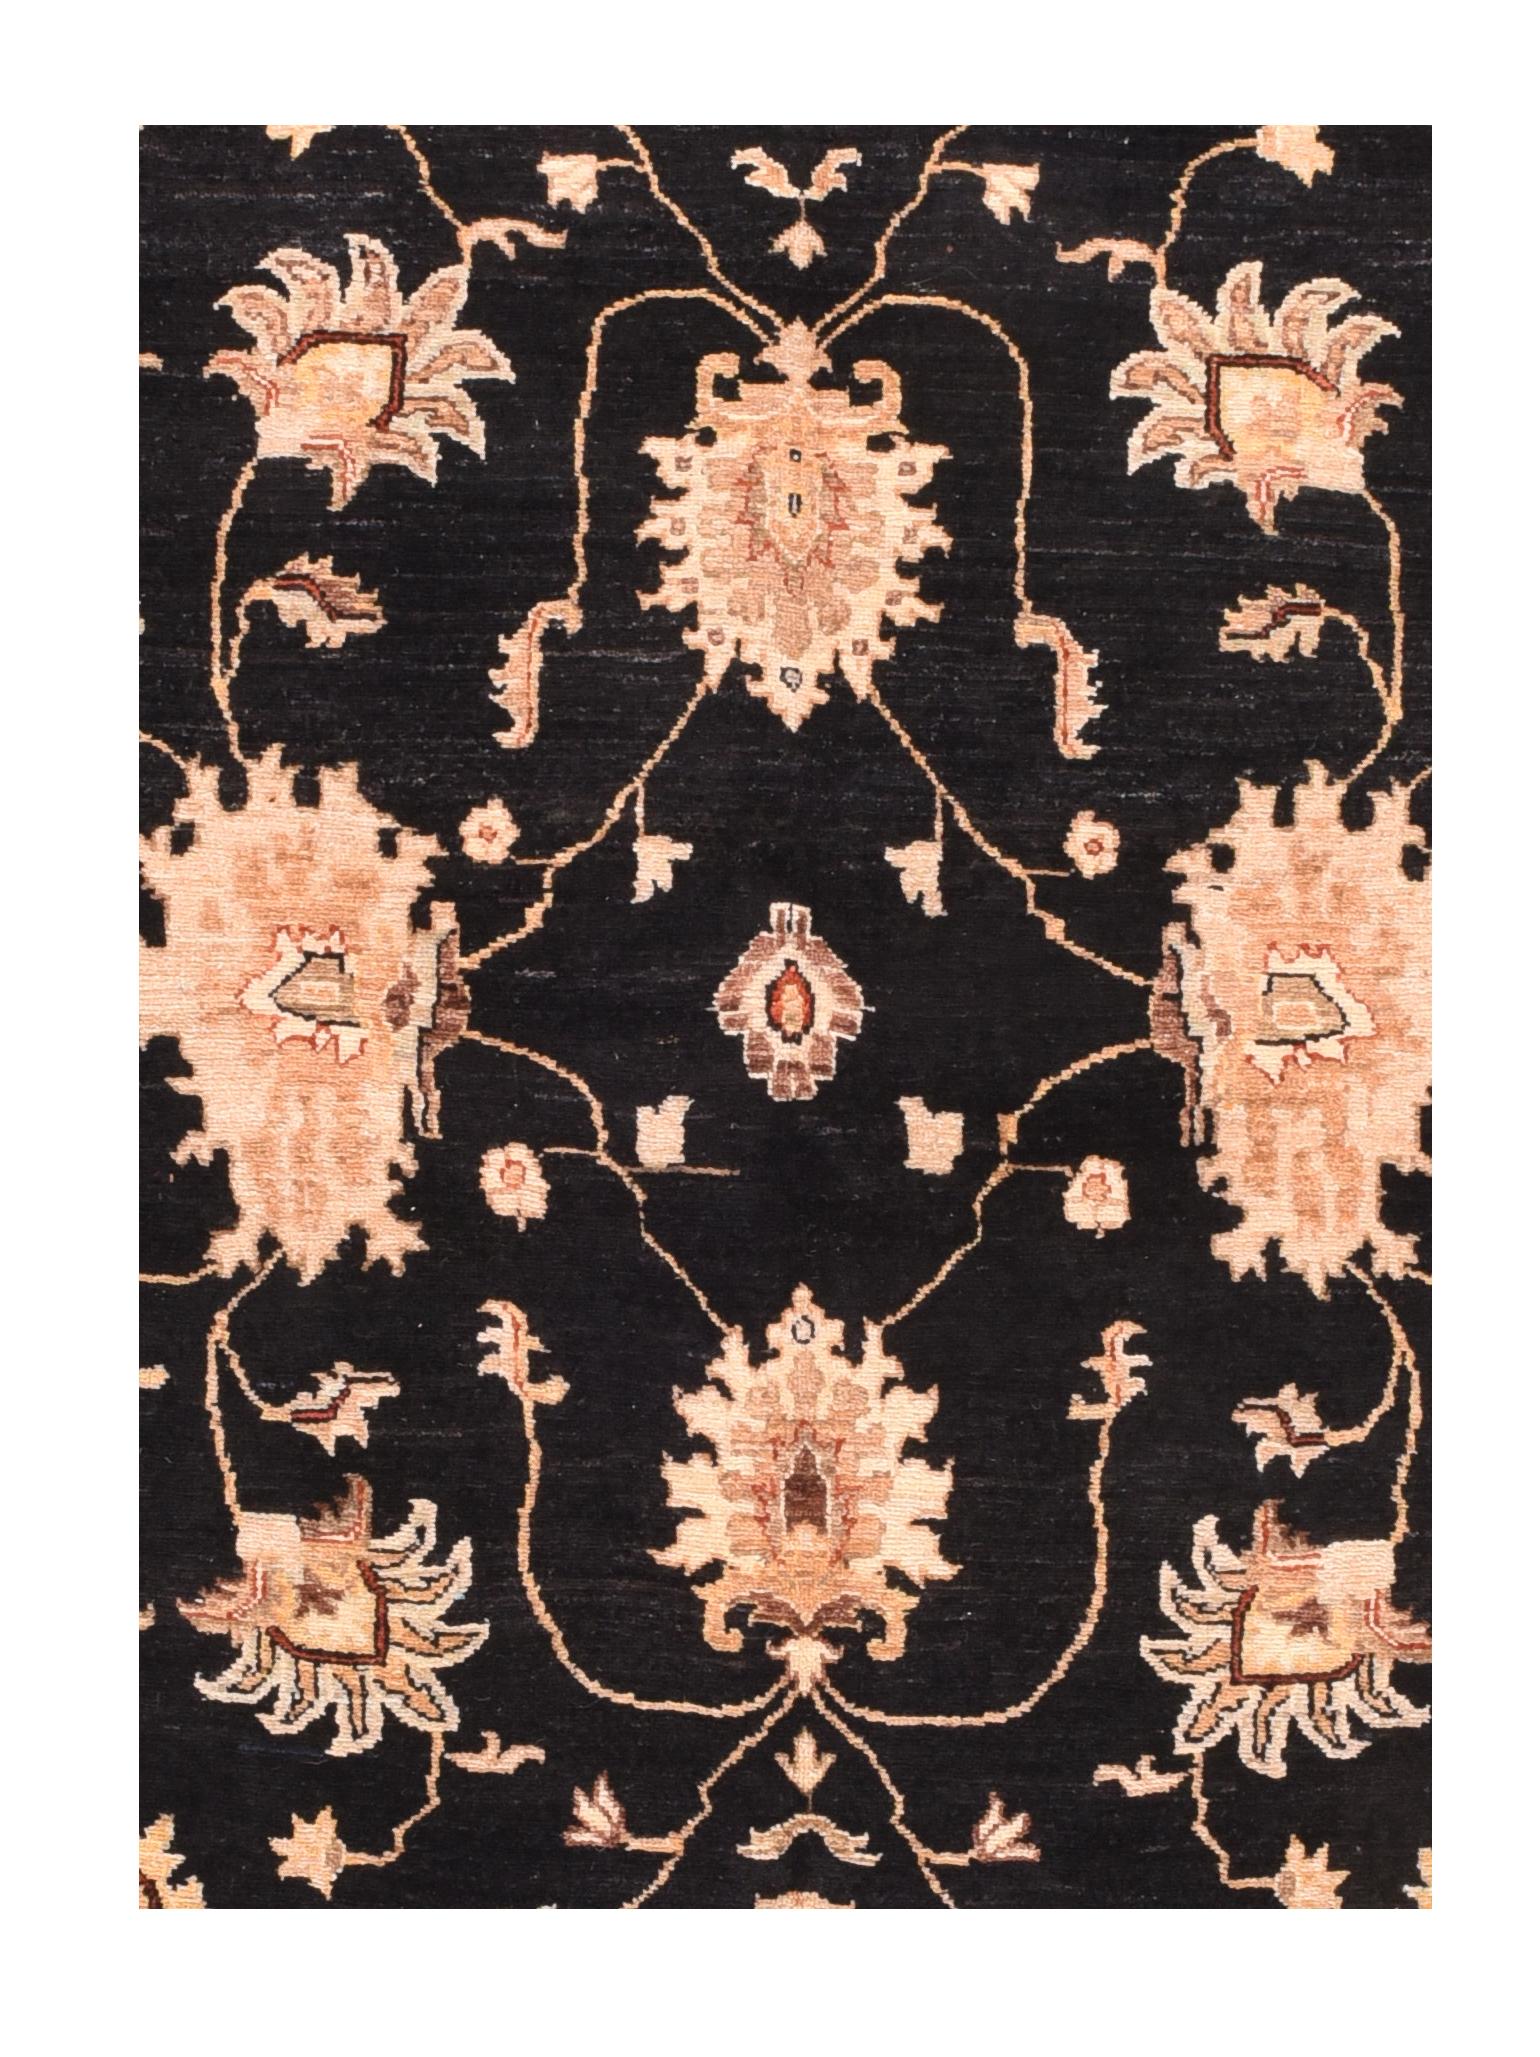 Fine Pishawar Pakistan rug, hand knotted
Design: Floral

Peshawar is the capital of the Pakistani province of Khyber Pakhtunkhwa. Situated in the broad Valley of Peshawar near the eastern end of the historic Khyber Pass, close to the border with